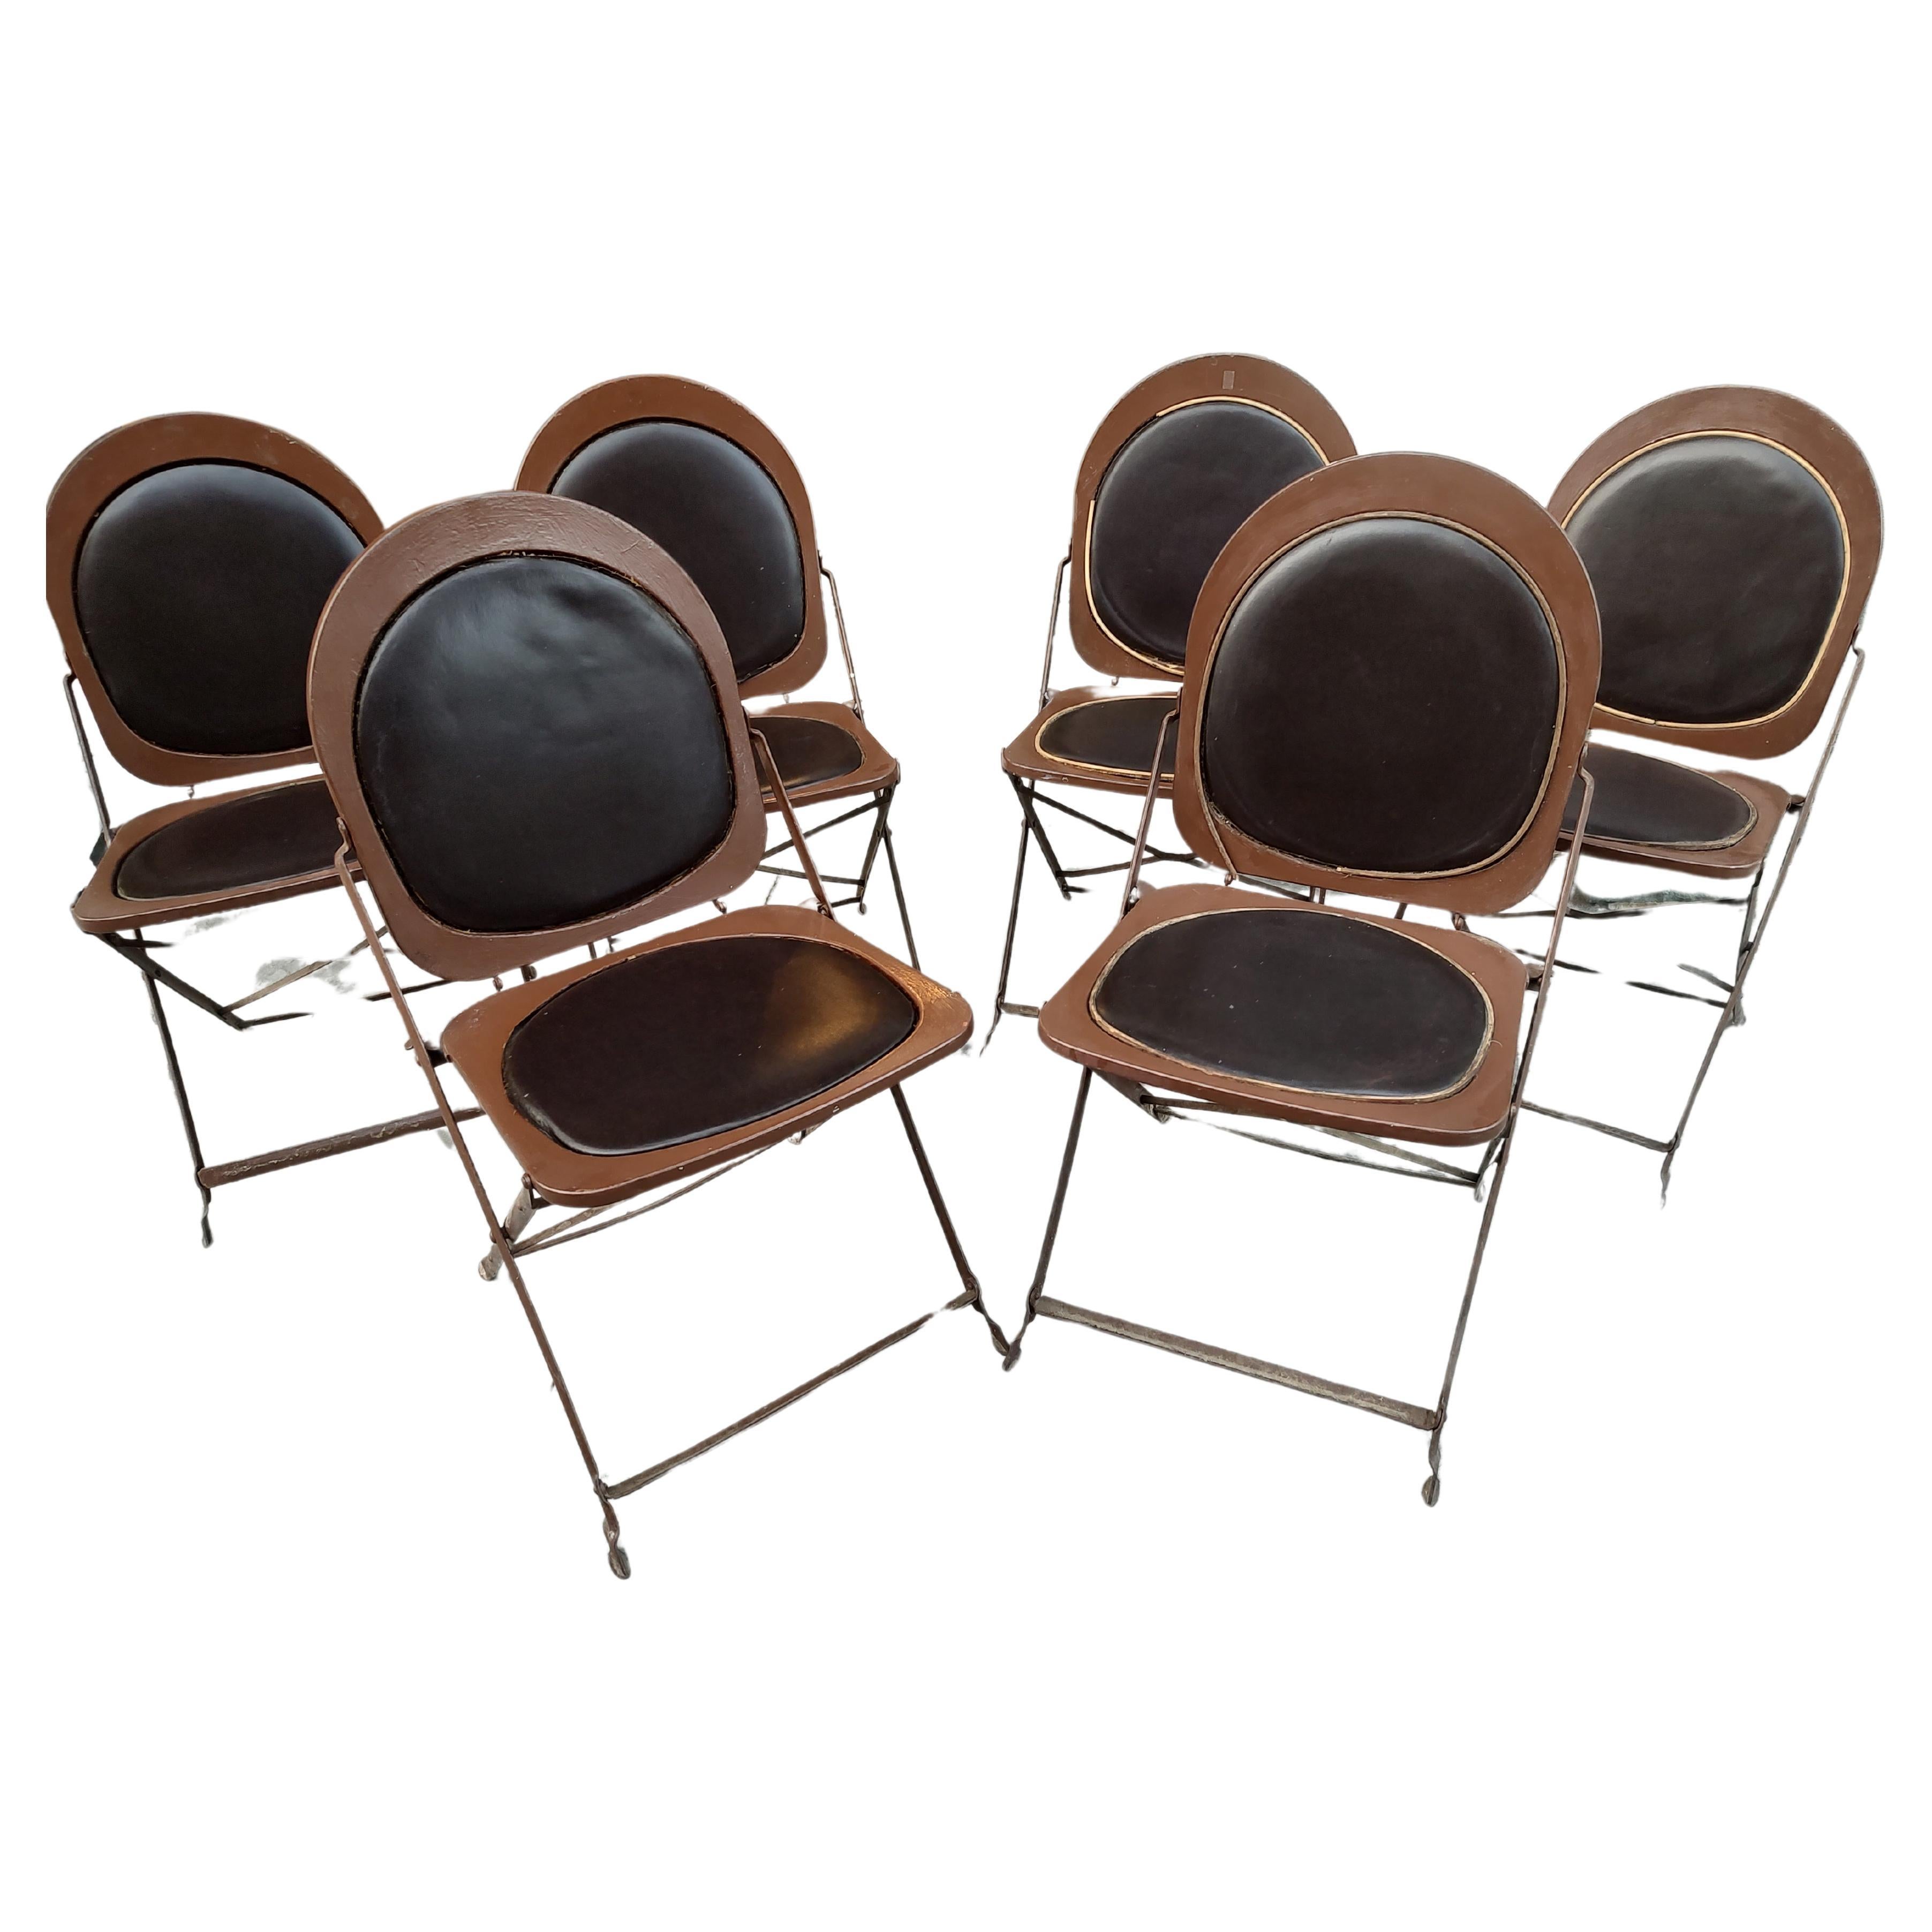 North American Set of Six Mid-Century Modern Sculptural Unique Folding Chairs For Sale